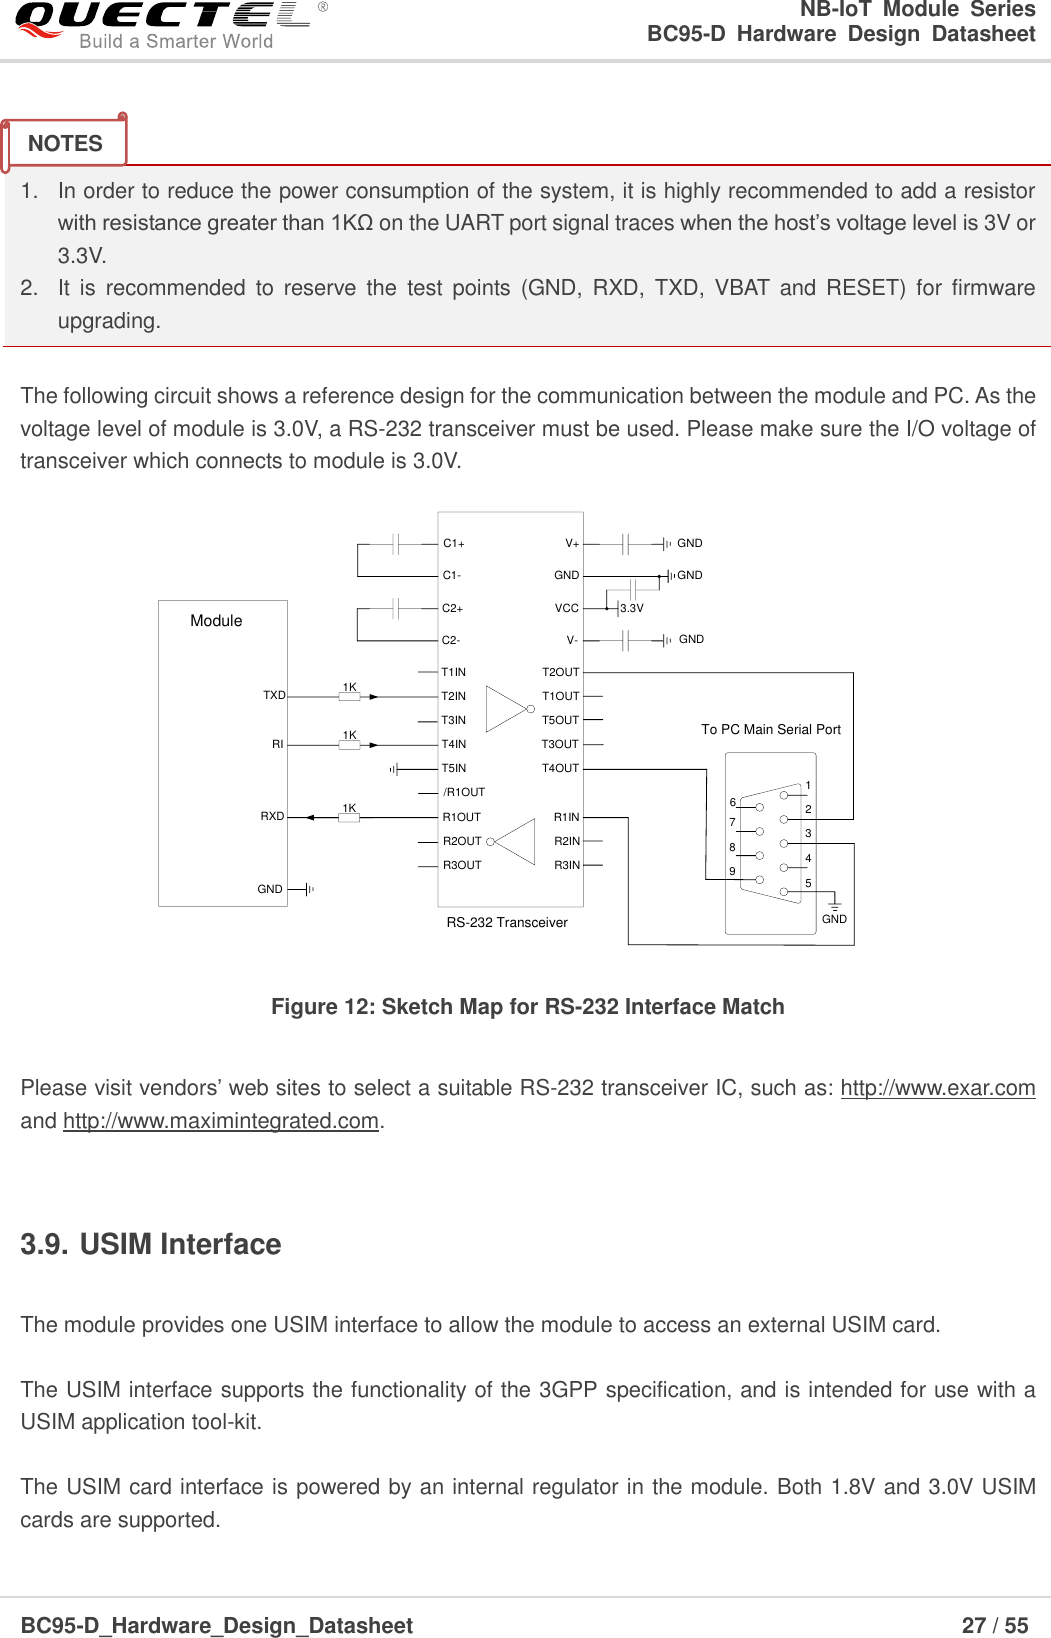                                                            NB-IoT  Module  Series                                                          BC95-D  Hardware  Design  Datasheet BC95-D_Hardware_Design_Datasheet                                                                    27 / 55     1.  In order to reduce the power consumption of the system, it is highly recommended to add a resistor with resistance greater than 1KΩ on the UART port signal traces when the host’s voltage level is 3V or 3.3V.   2.  It  is  recommended  to  reserve  the  test  points  (GND,  RXD,  TXD,  VBAT  and  RESET)  for  firmware upgrading.  The following circuit shows a reference design for the communication between the module and PC. As the voltage level of module is 3.0V, a RS-232 transceiver must be used. Please make sure the I/O voltage of transceiver which connects to module is 3.0V. TXDRXDRIModuleGNDC1+C1-C2+C2-V+VCCGNDV-3.3VT1INT2INT3INT4INR1INR2INR3INR1OUTR2OUTR3OUTT1OUTT2OUTT5OUTT3OUTT4OUTT5INGNDGND/R1OUT 12345789GNDTo PC Main Serial PortGND1K1K1KRS-232 Transceiver6 Figure 12: Sketch Map for RS-232 Interface Match  Please visit vendors’ web sites to select a suitable RS-232 transceiver IC, such as: http://www.exar.com and http://www.maximintegrated.com.  3.9. USIM Interface  The module provides one USIM interface to allow the module to access an external USIM card.    The USIM interface supports the functionality of the 3GPP specification, and is intended for use with a USIM application tool-kit.  The USIM card interface is powered by an internal regulator in the module. Both 1.8V and 3.0V USIM cards are supported.   NOTES 